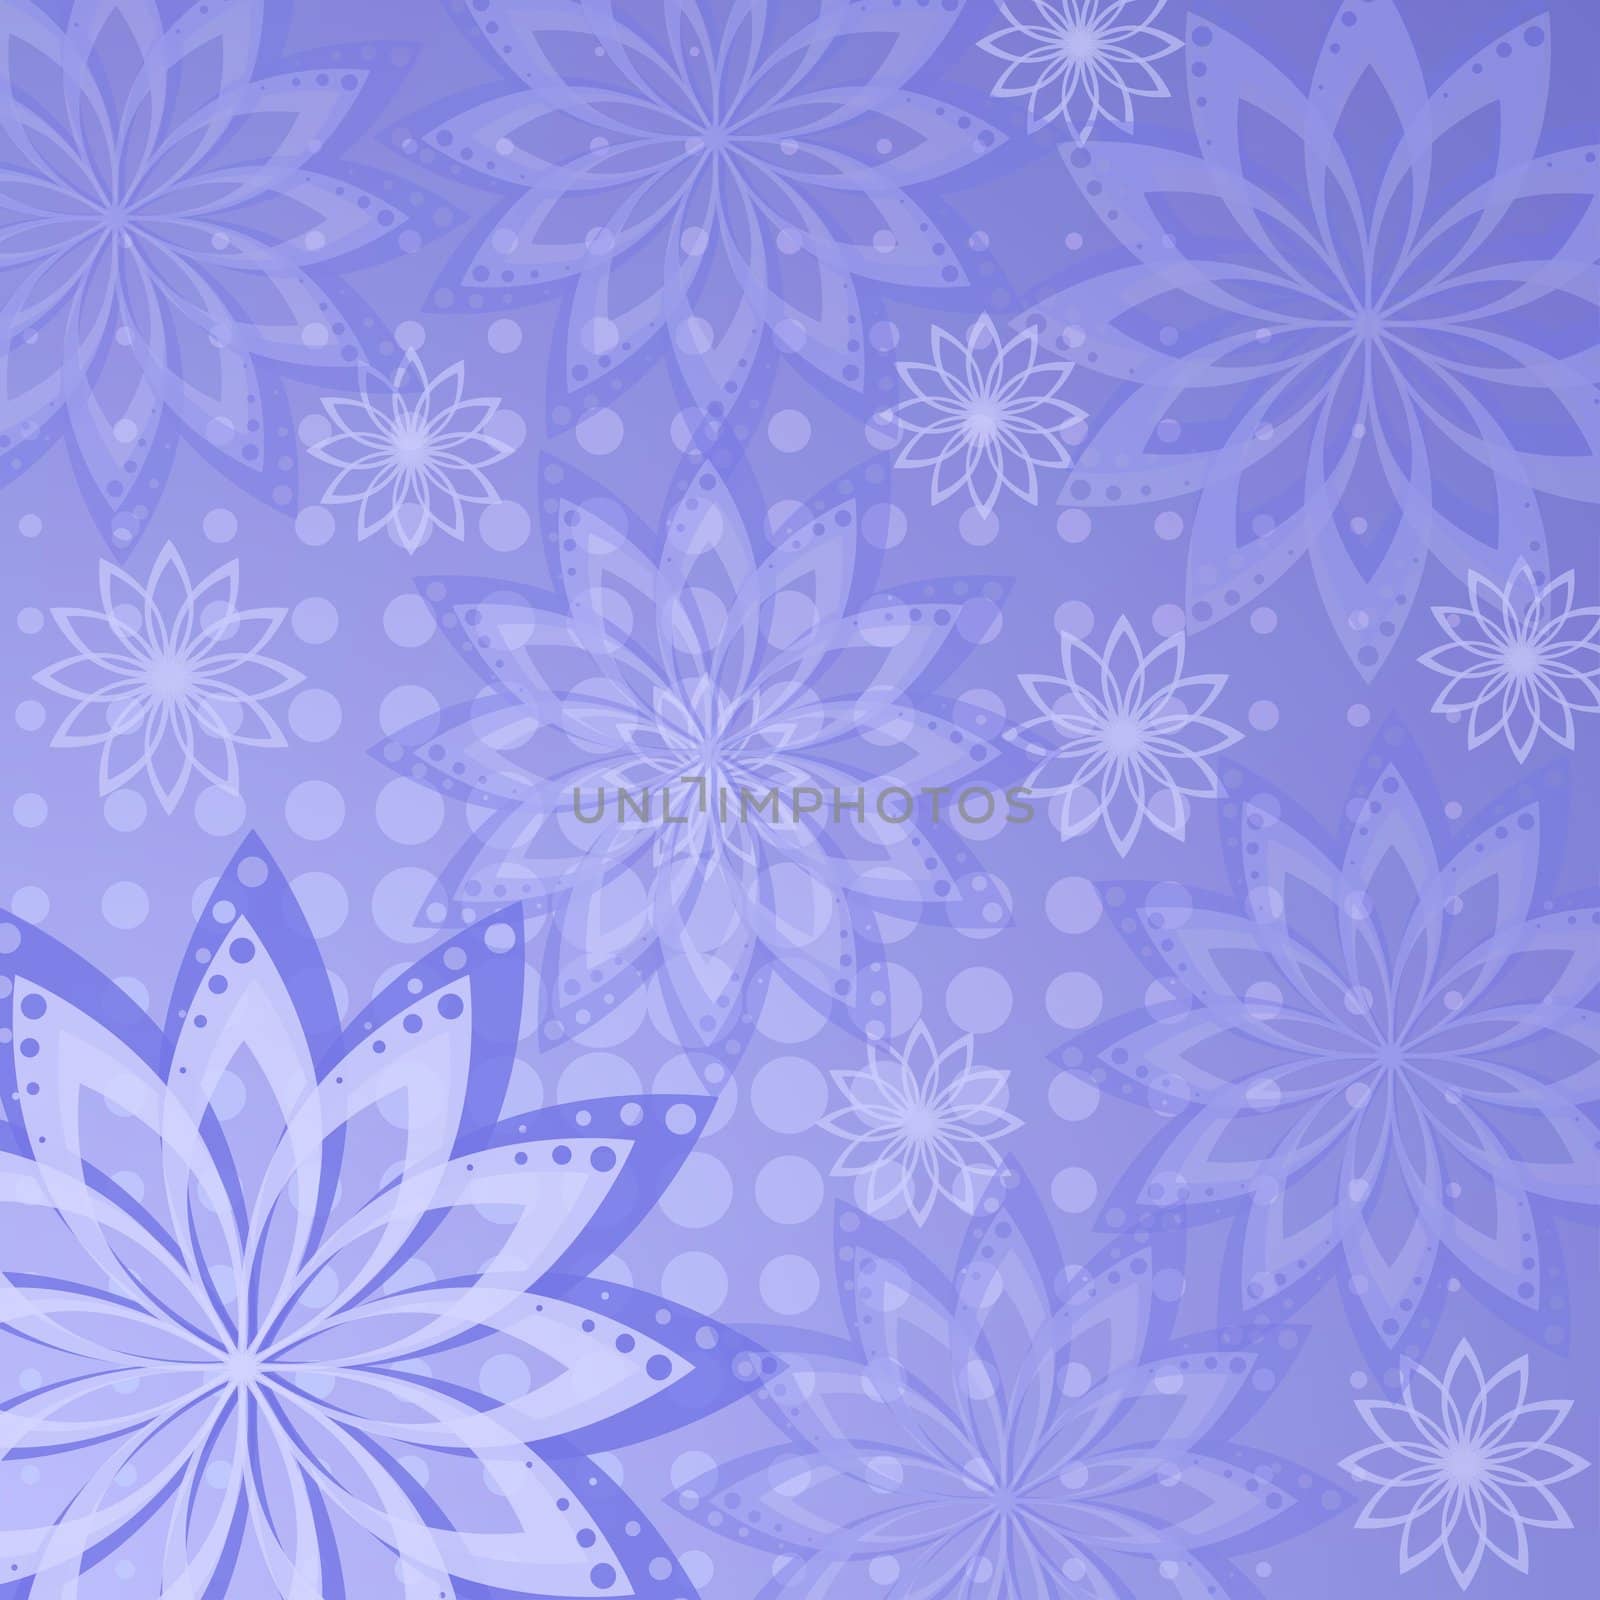 Abstract floral violet background with white flowers contours